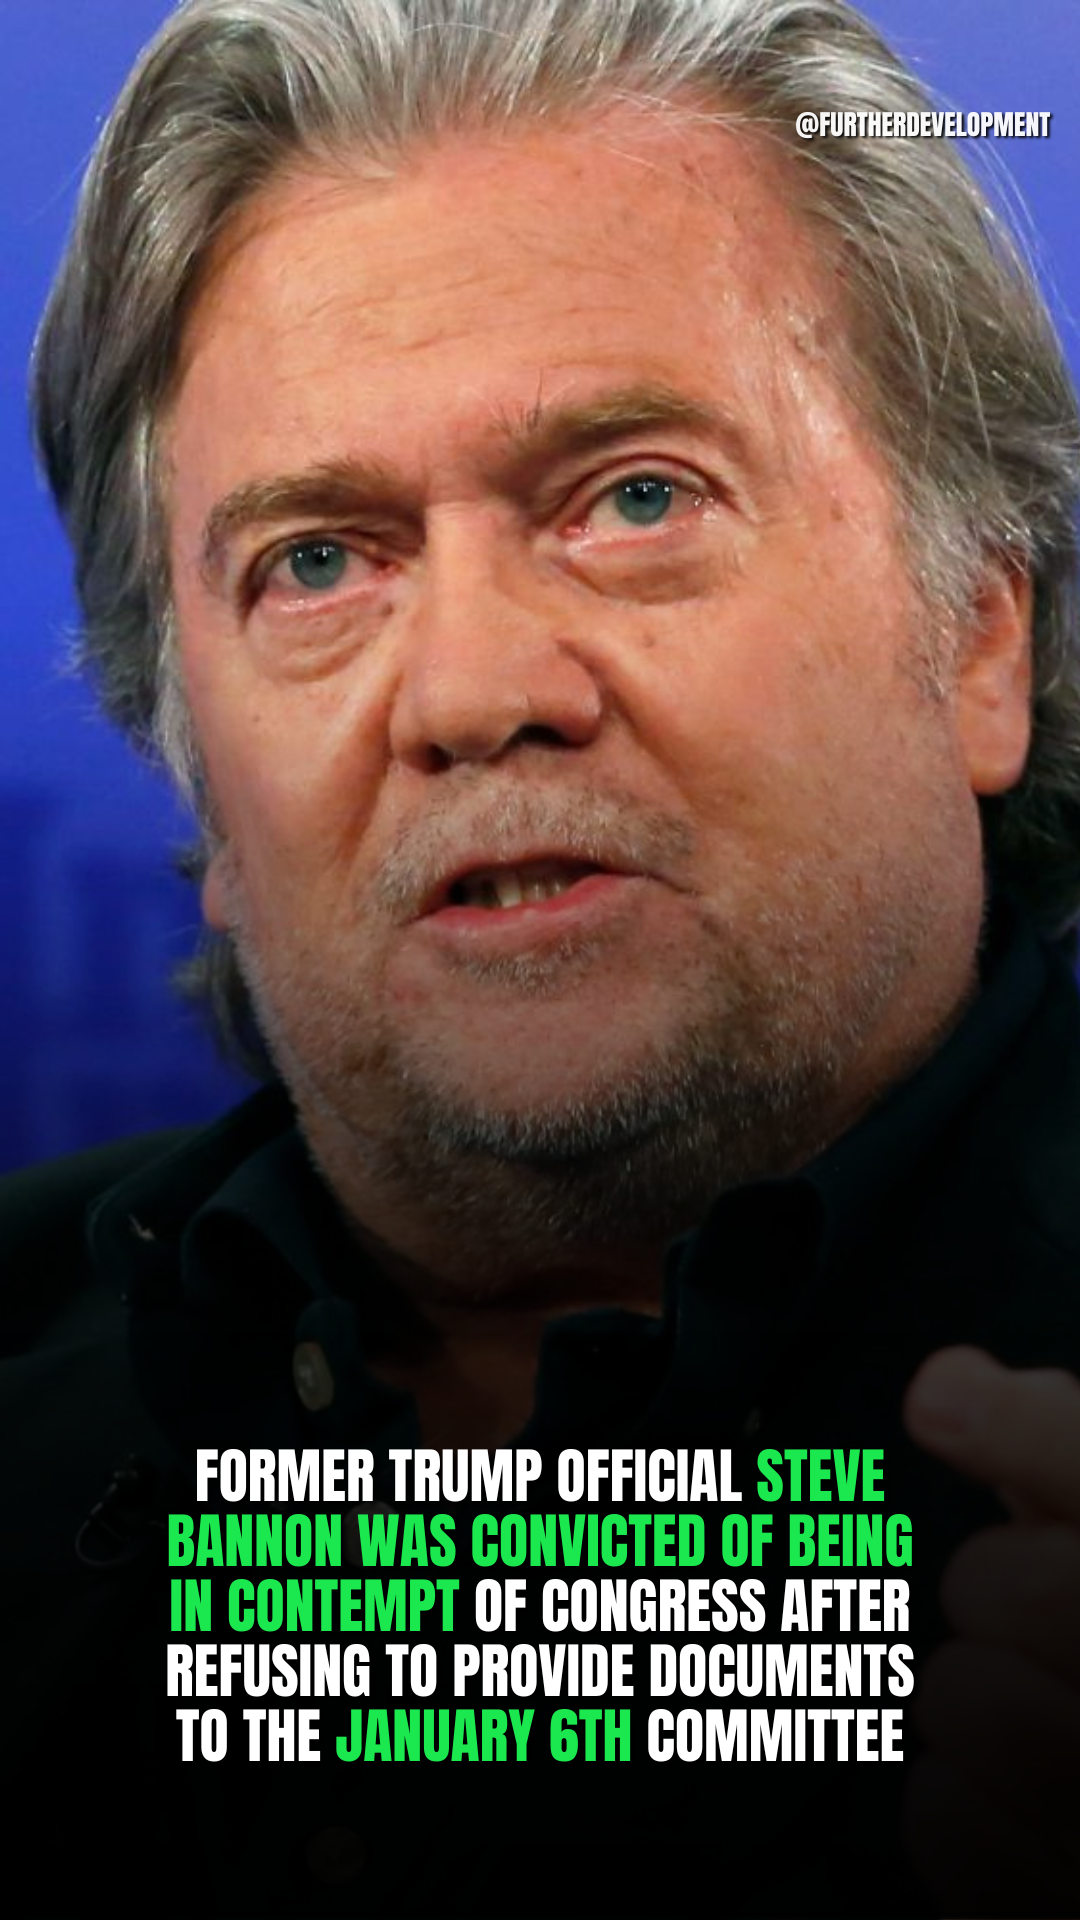 Former Trump official Steve Bannon was convicted of being in contempt of Congress after refusing to provide documents to the January 6th committee